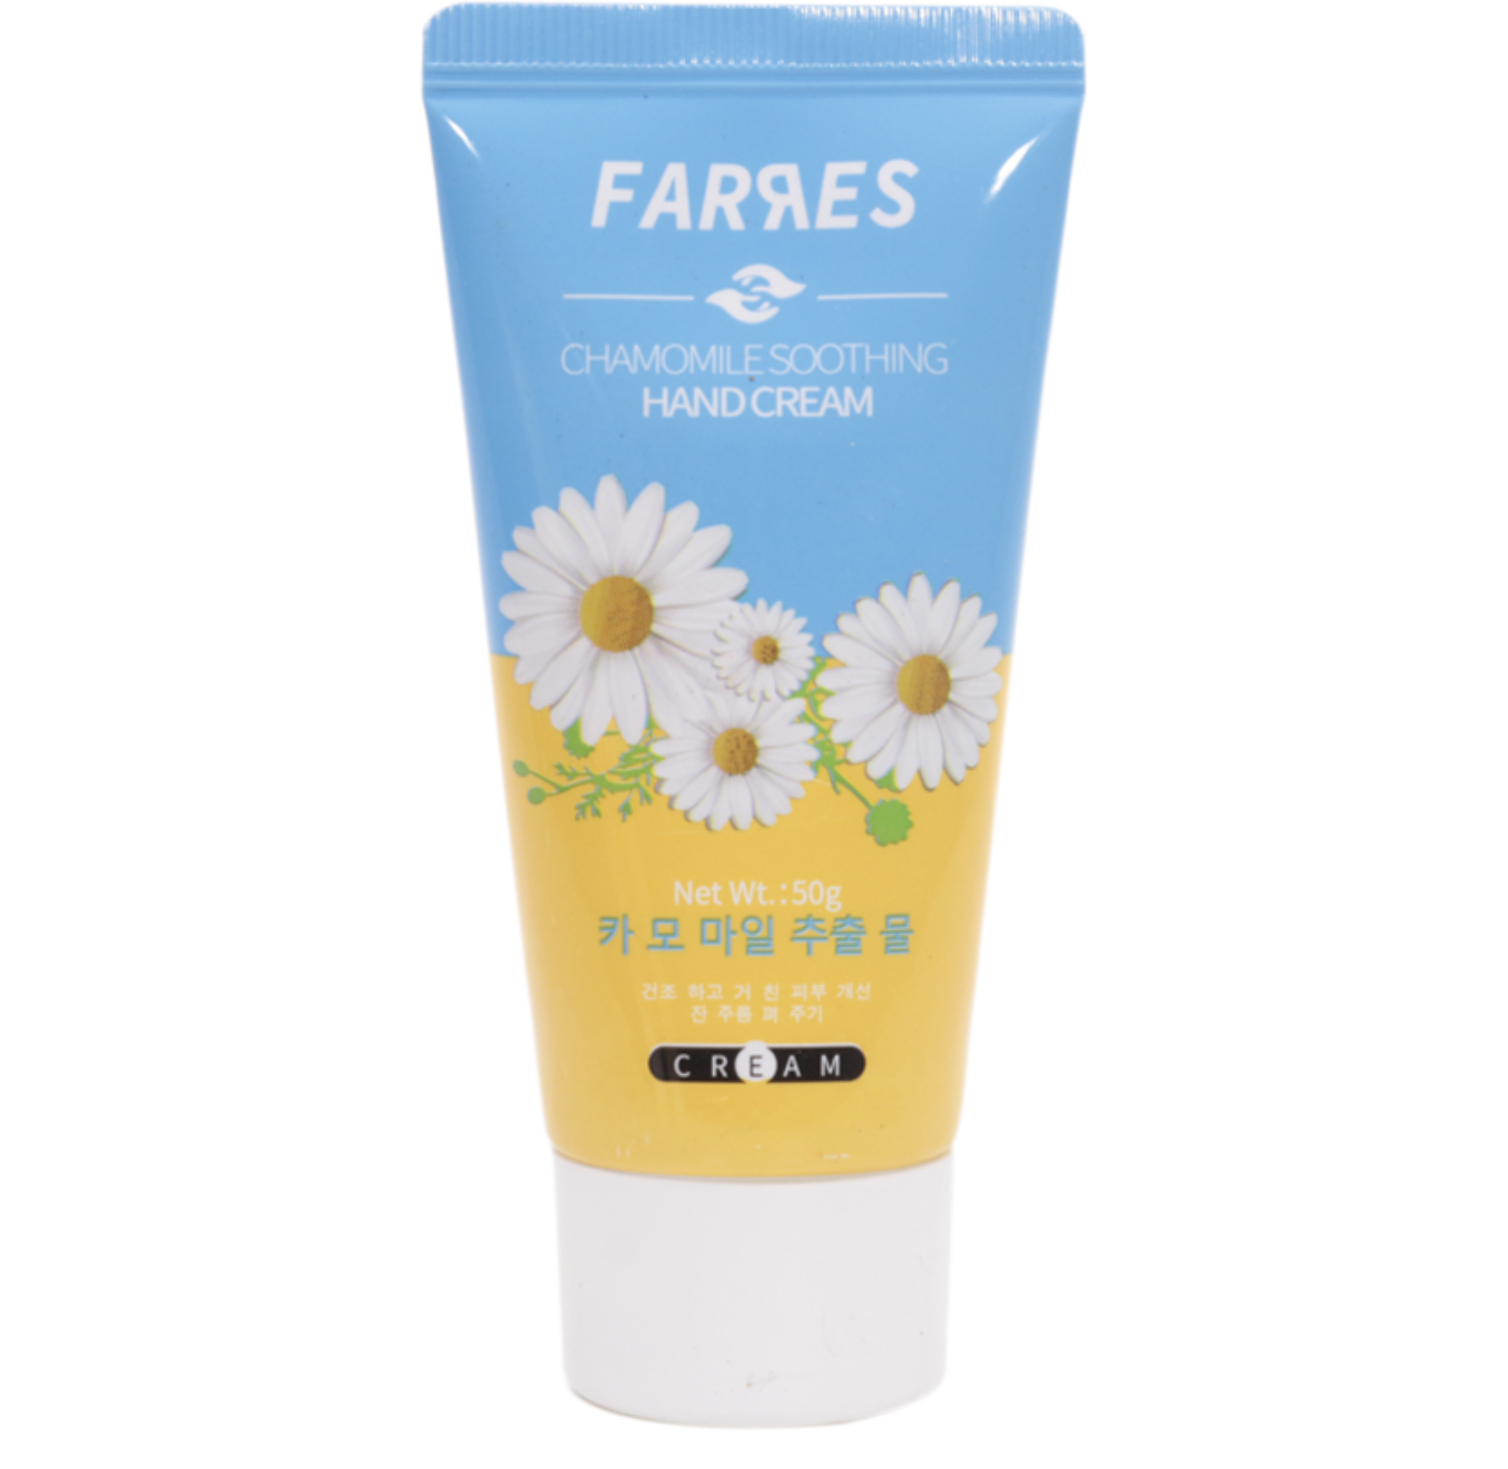   / Farres 9608-03 -    Camomile Soothing  50 